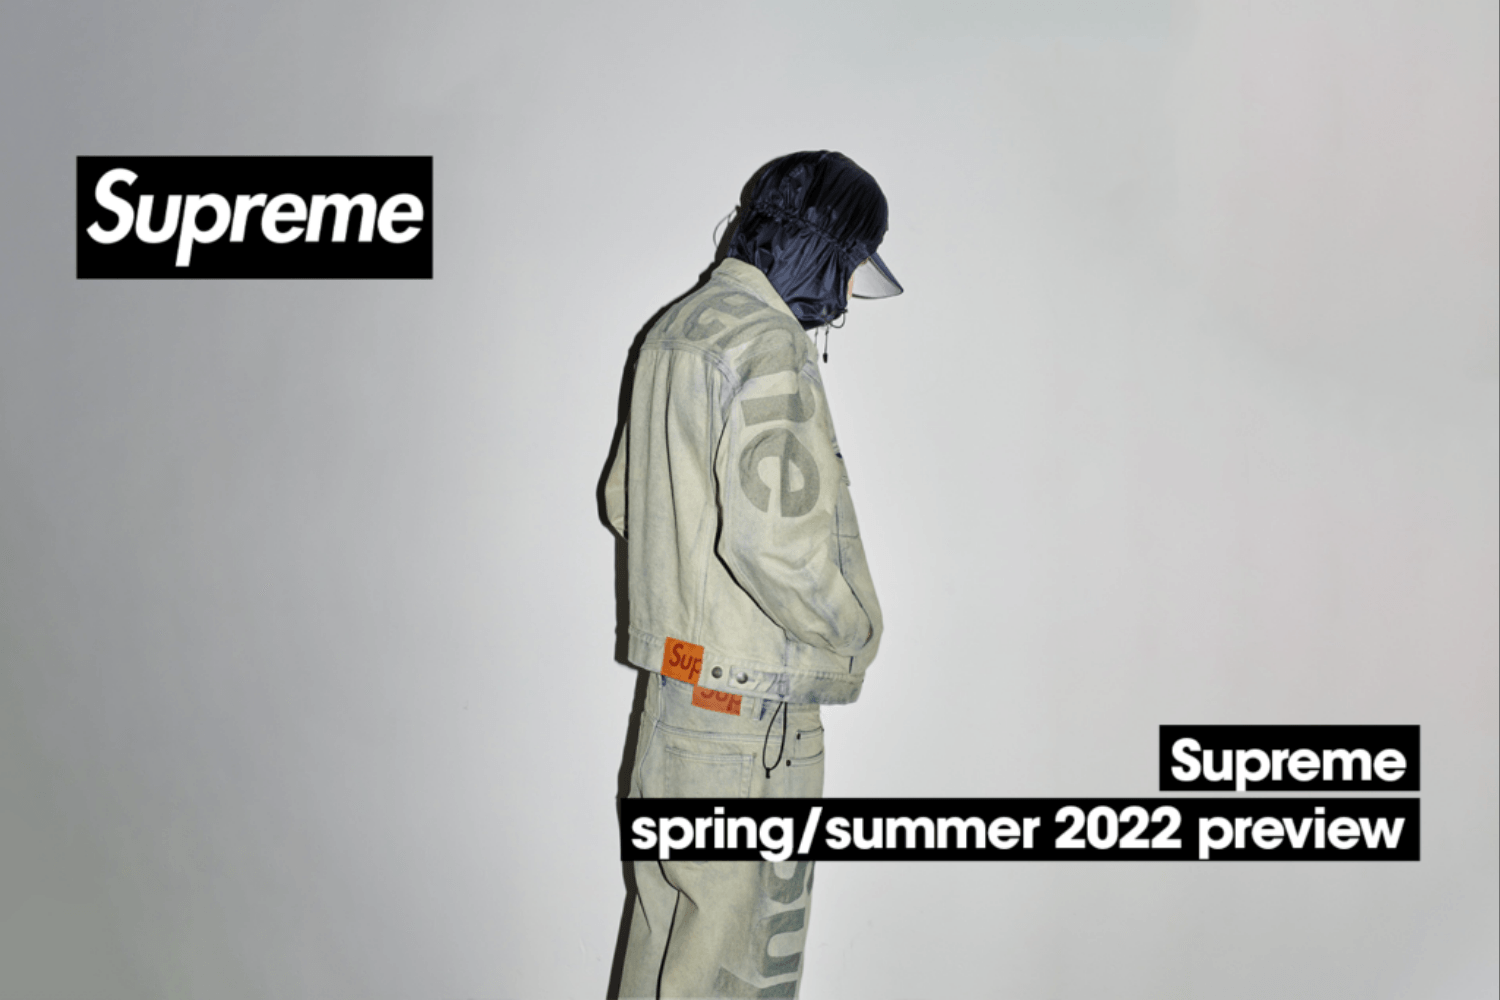 Supreme presents the spring/summer collection 2022